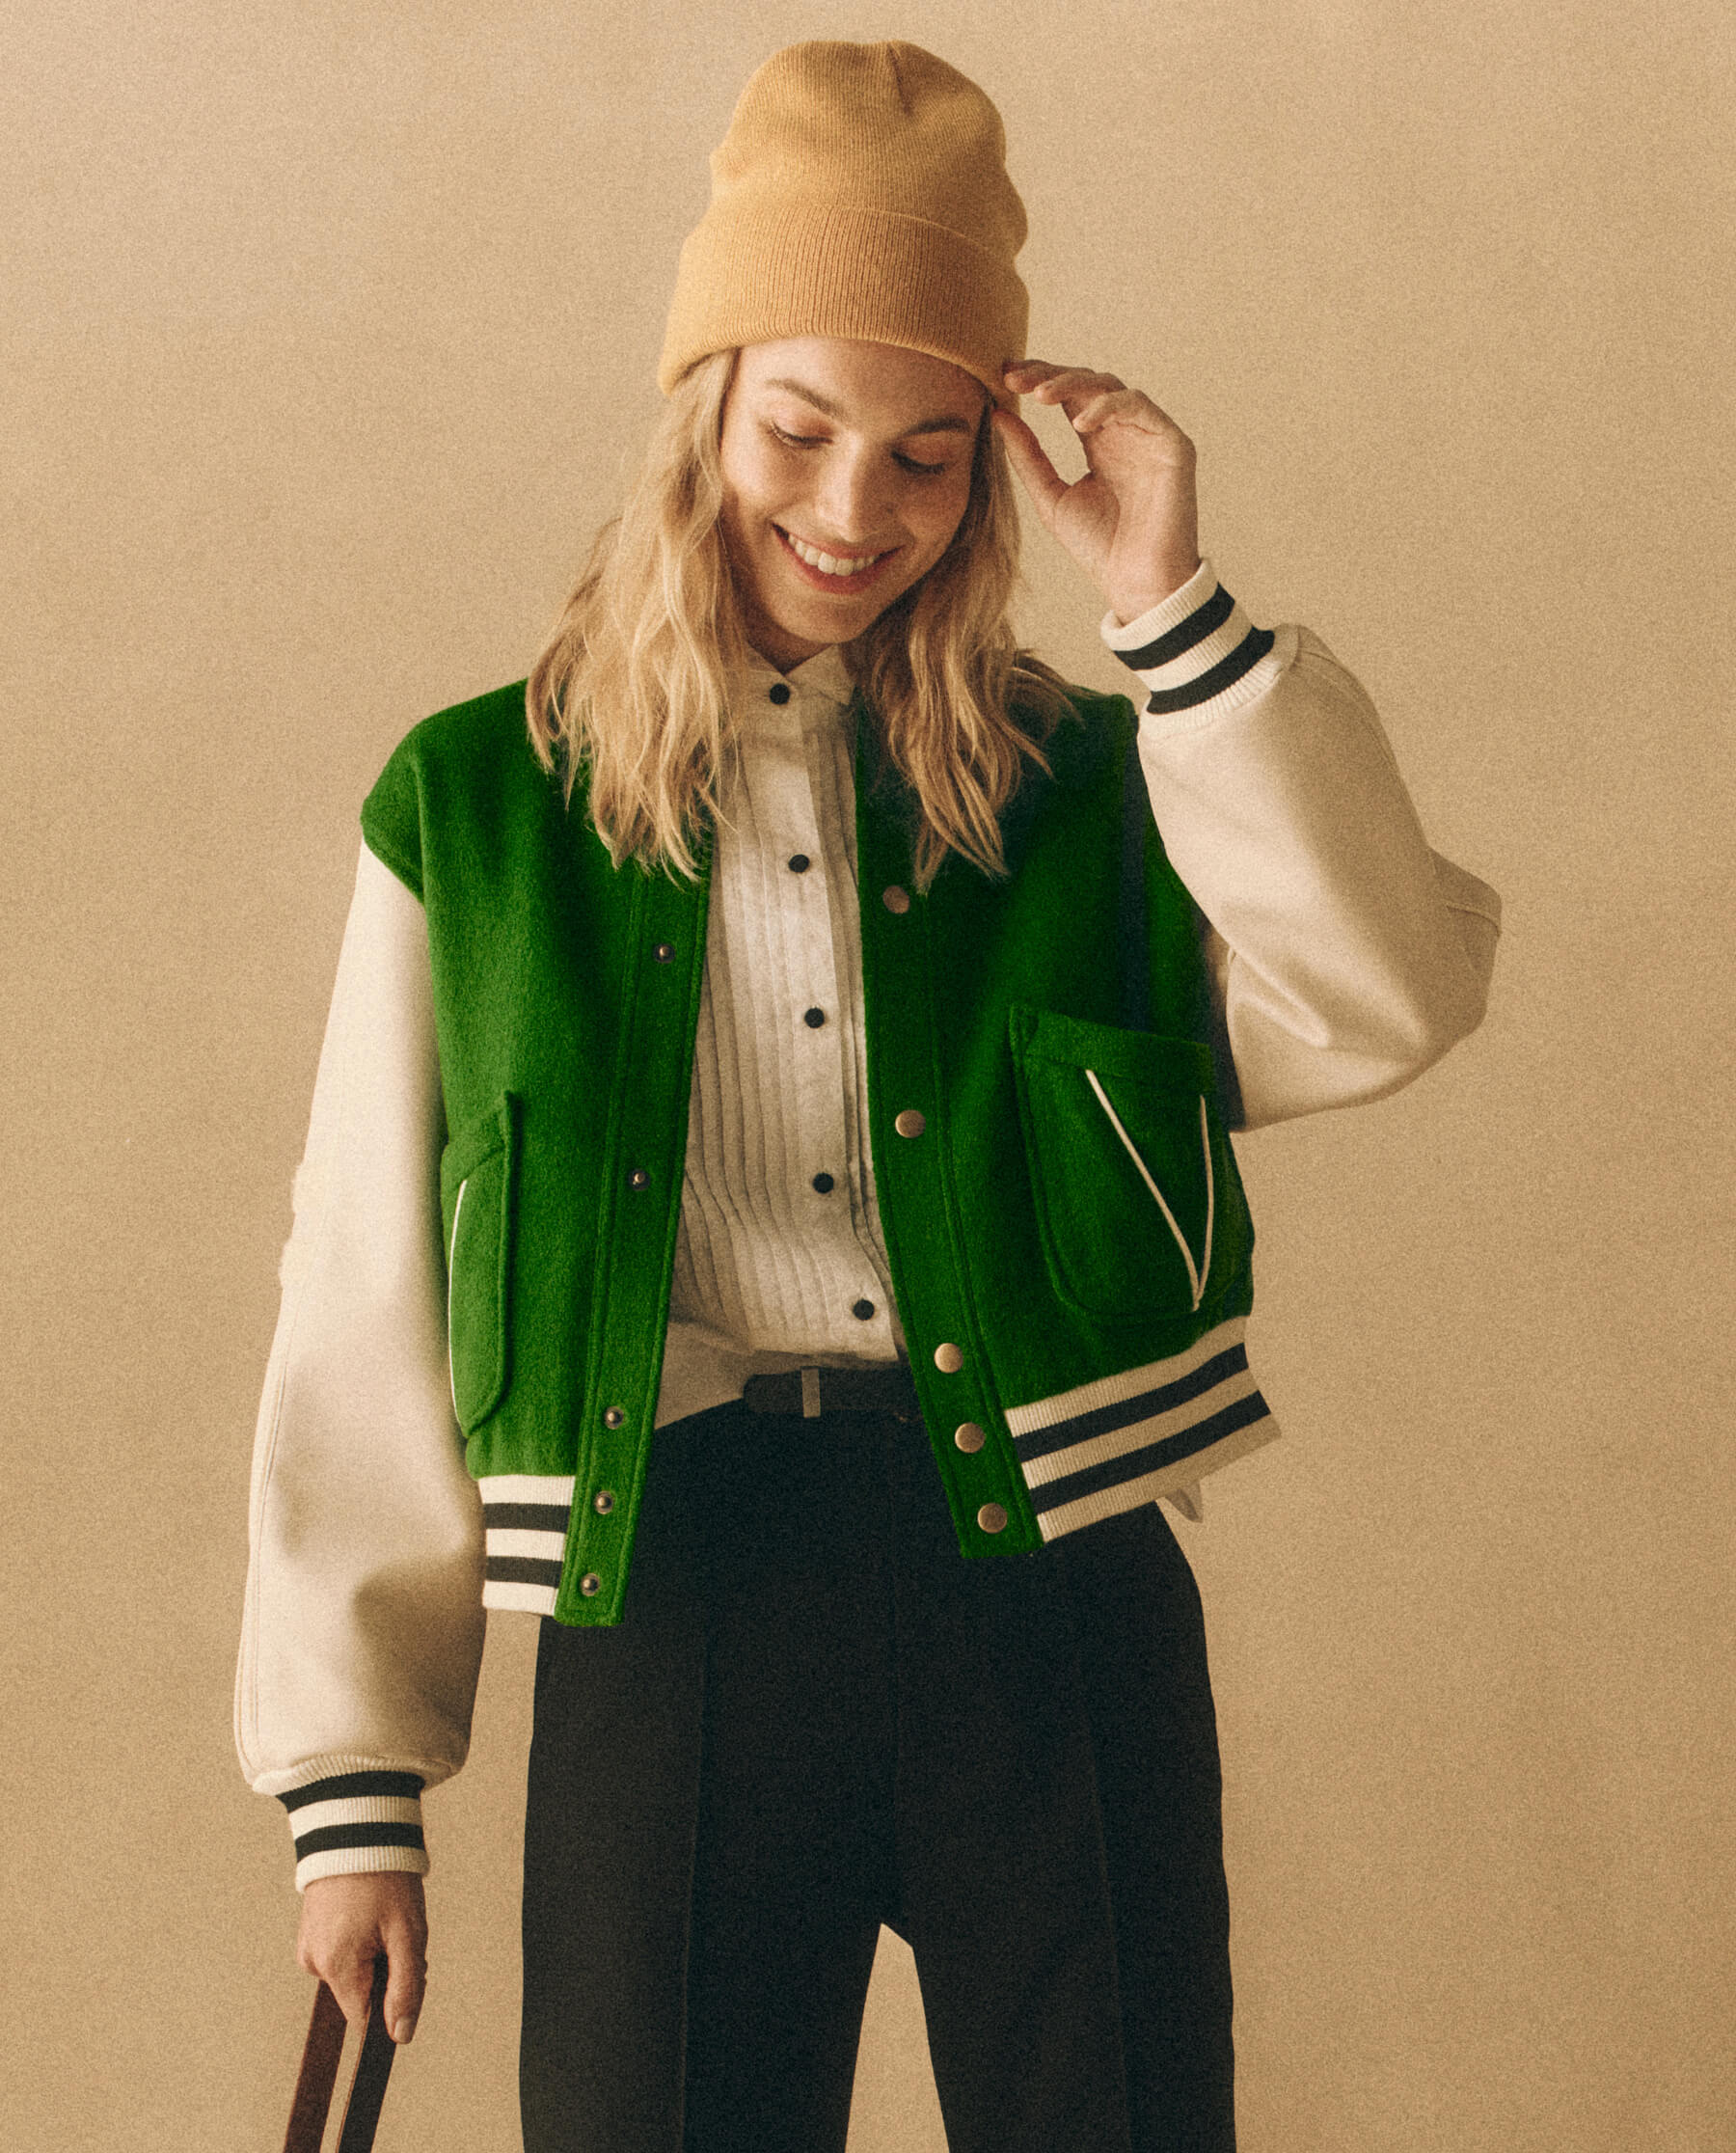 The Varsity Bomber. -- Field Green JACKET THE GREAT. HOL 23 D1 SALE